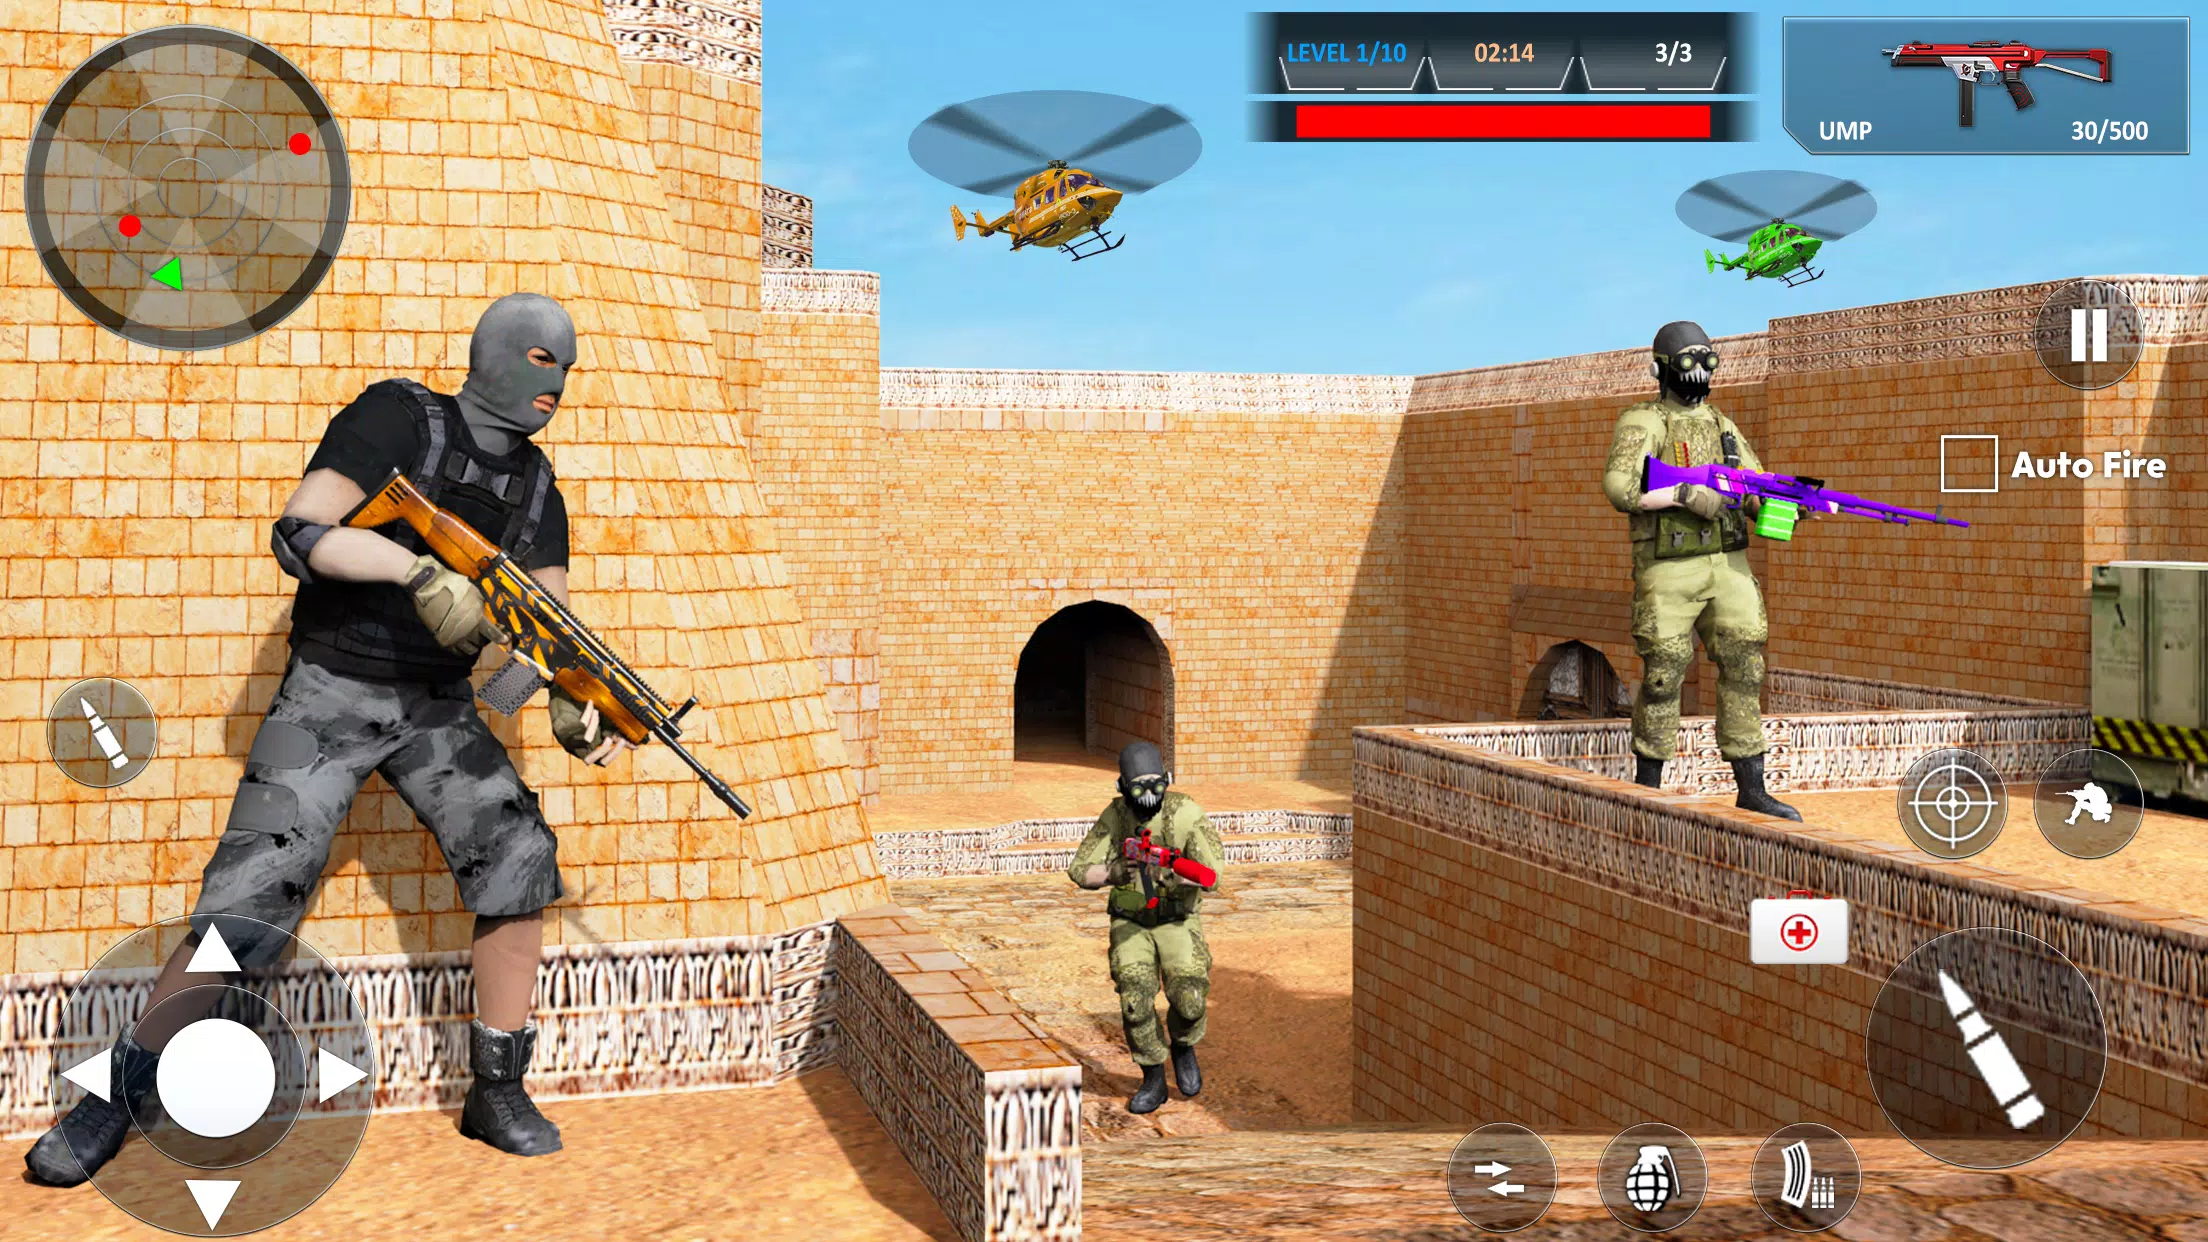 Critical Strike : Shooting War for Android - Free App Download